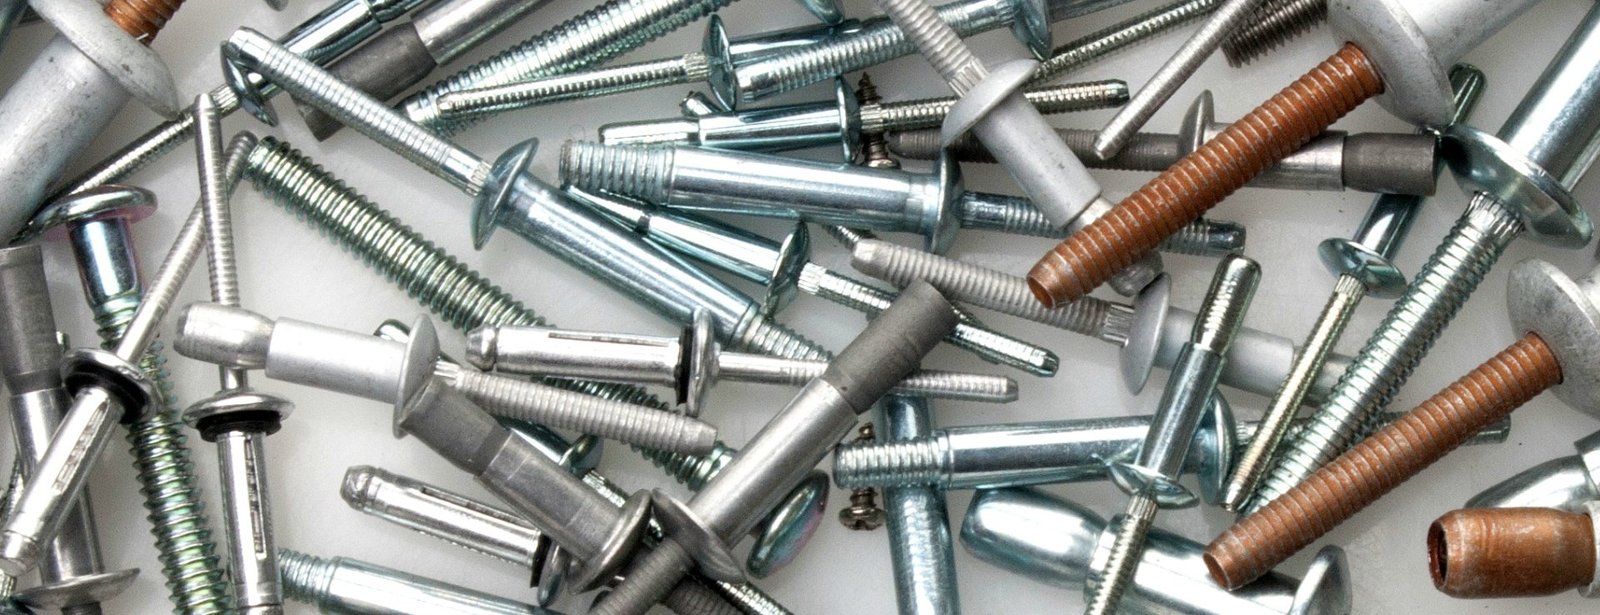 Different Types of Structural Rivet Gun And What They’re ...
